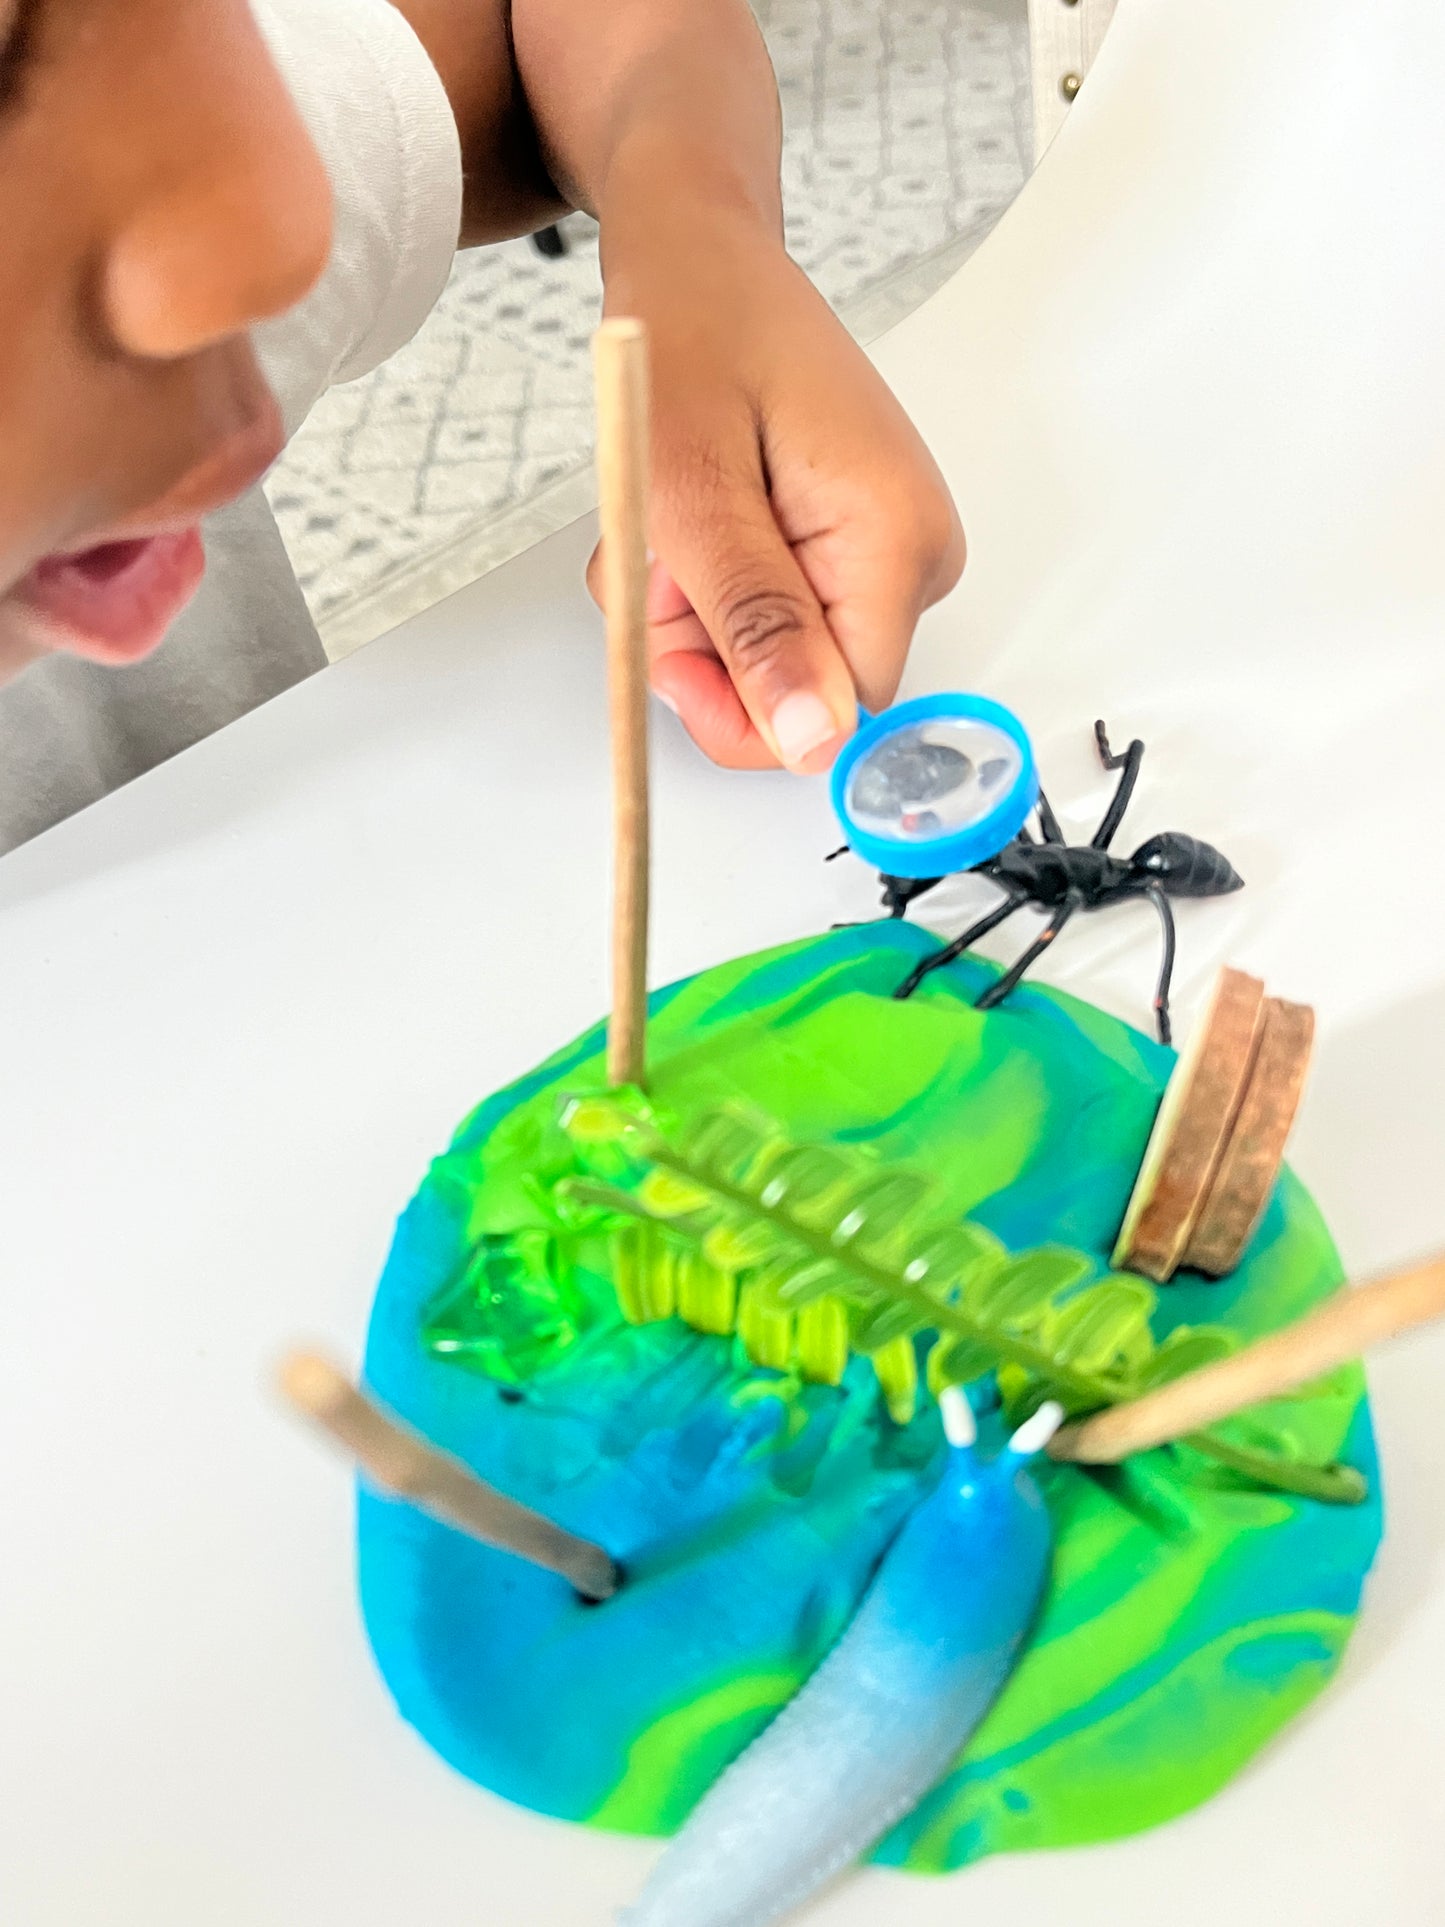 Insect Play Dough Jar